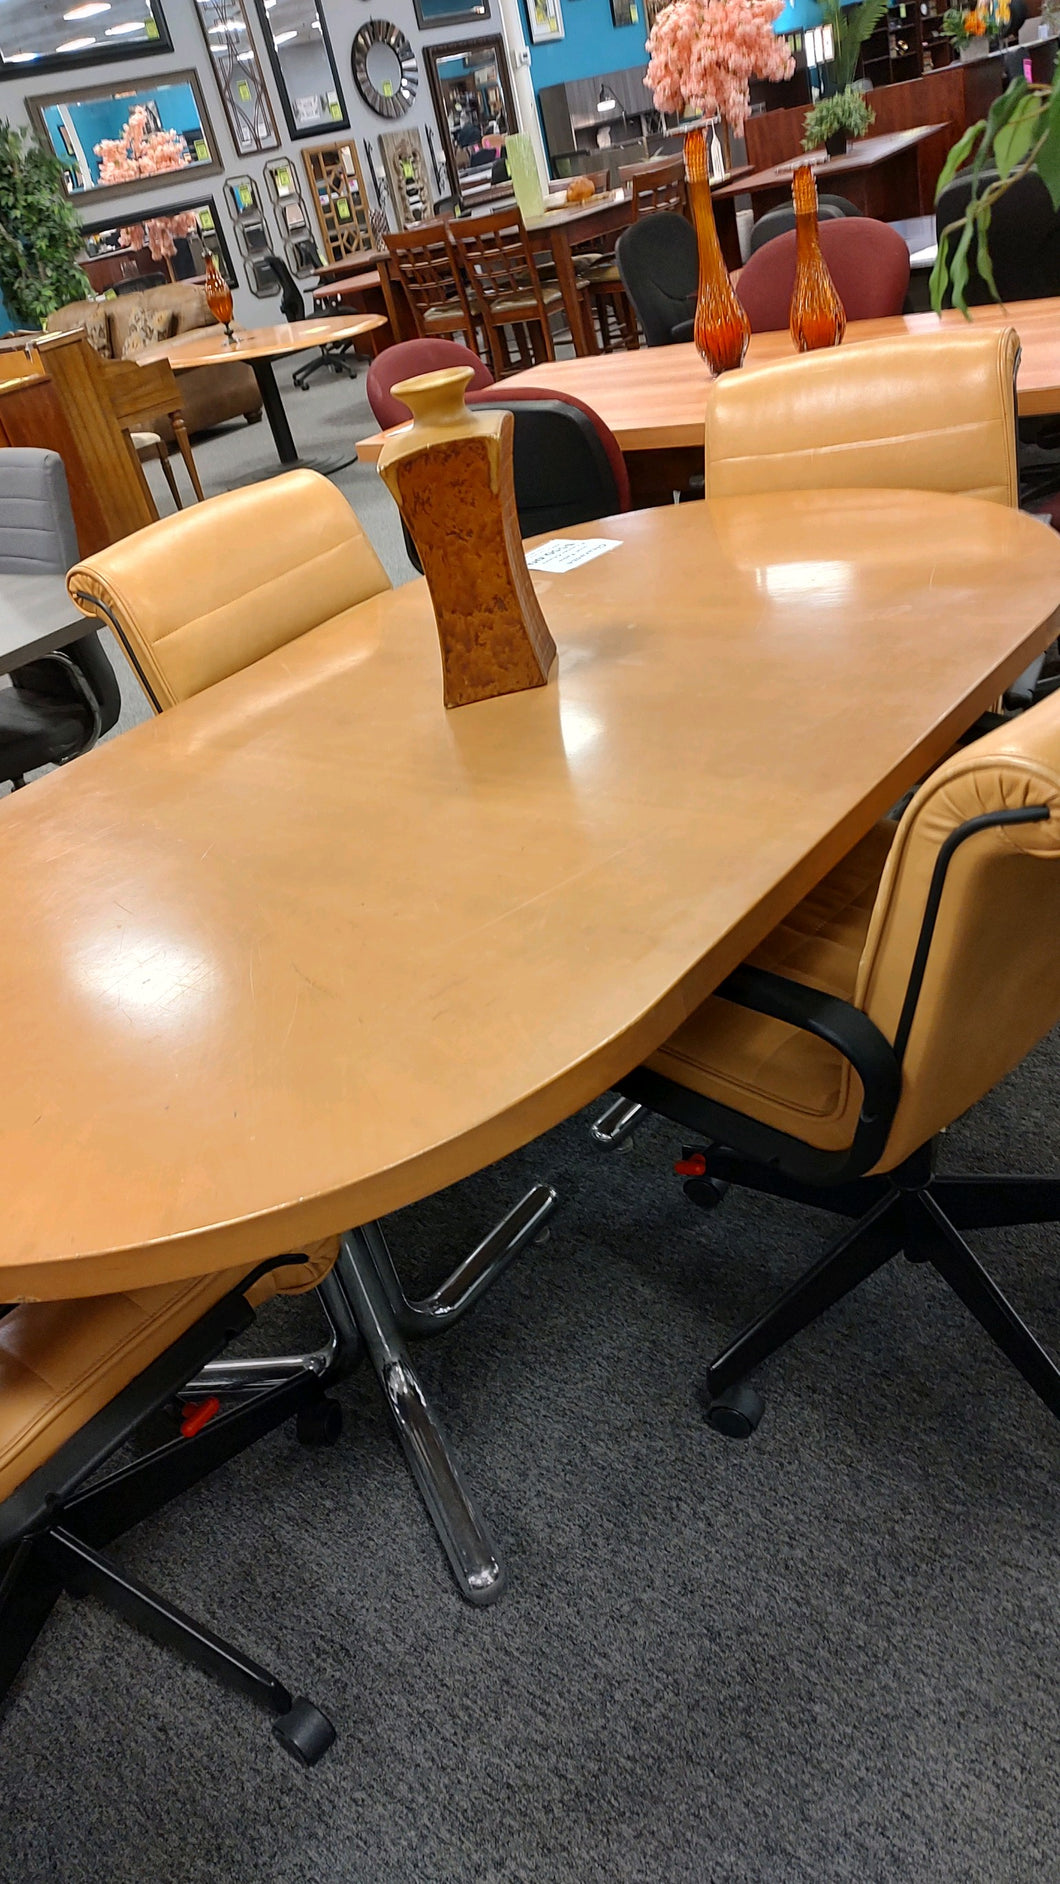 R1460 Honey Oval Used Table w/4 Butterscotch Chairs $550 - 1 Only!